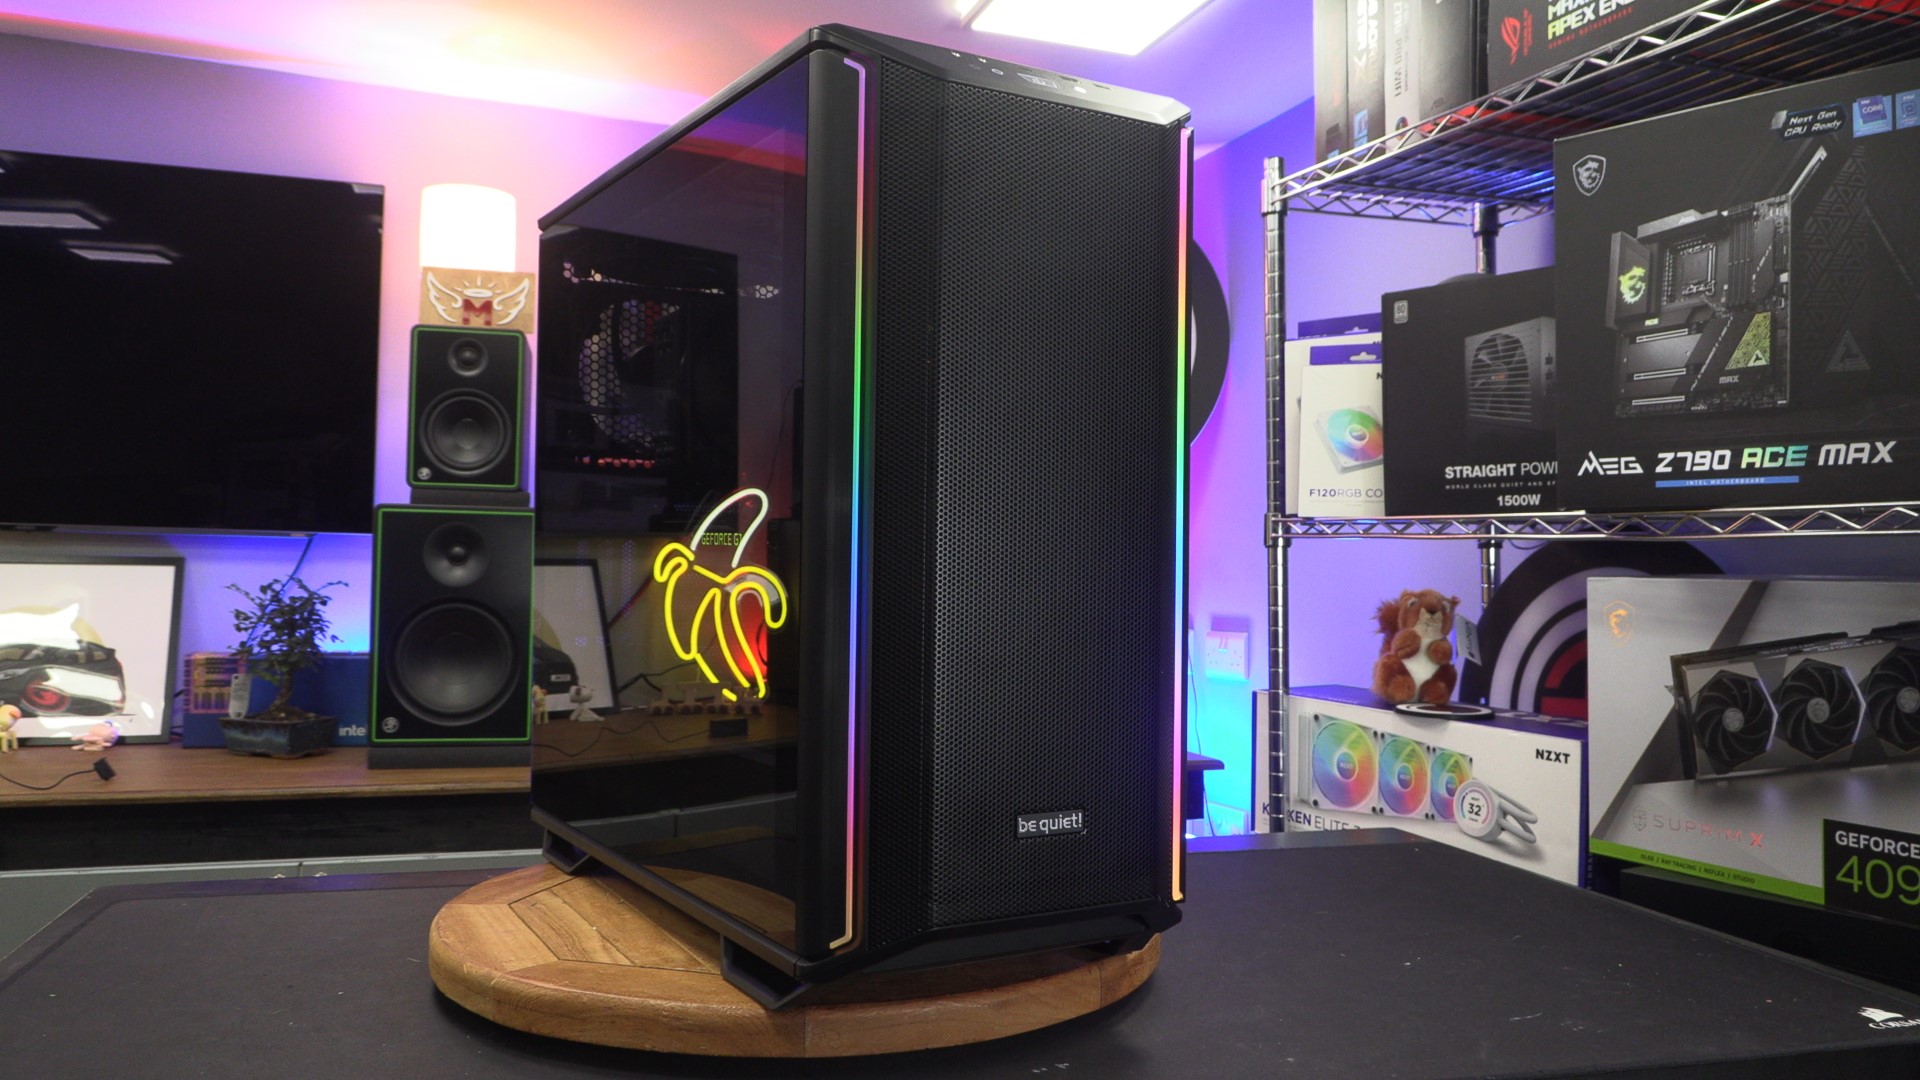 SHADOW BASE 800  Black silent PC cases from be quiet!